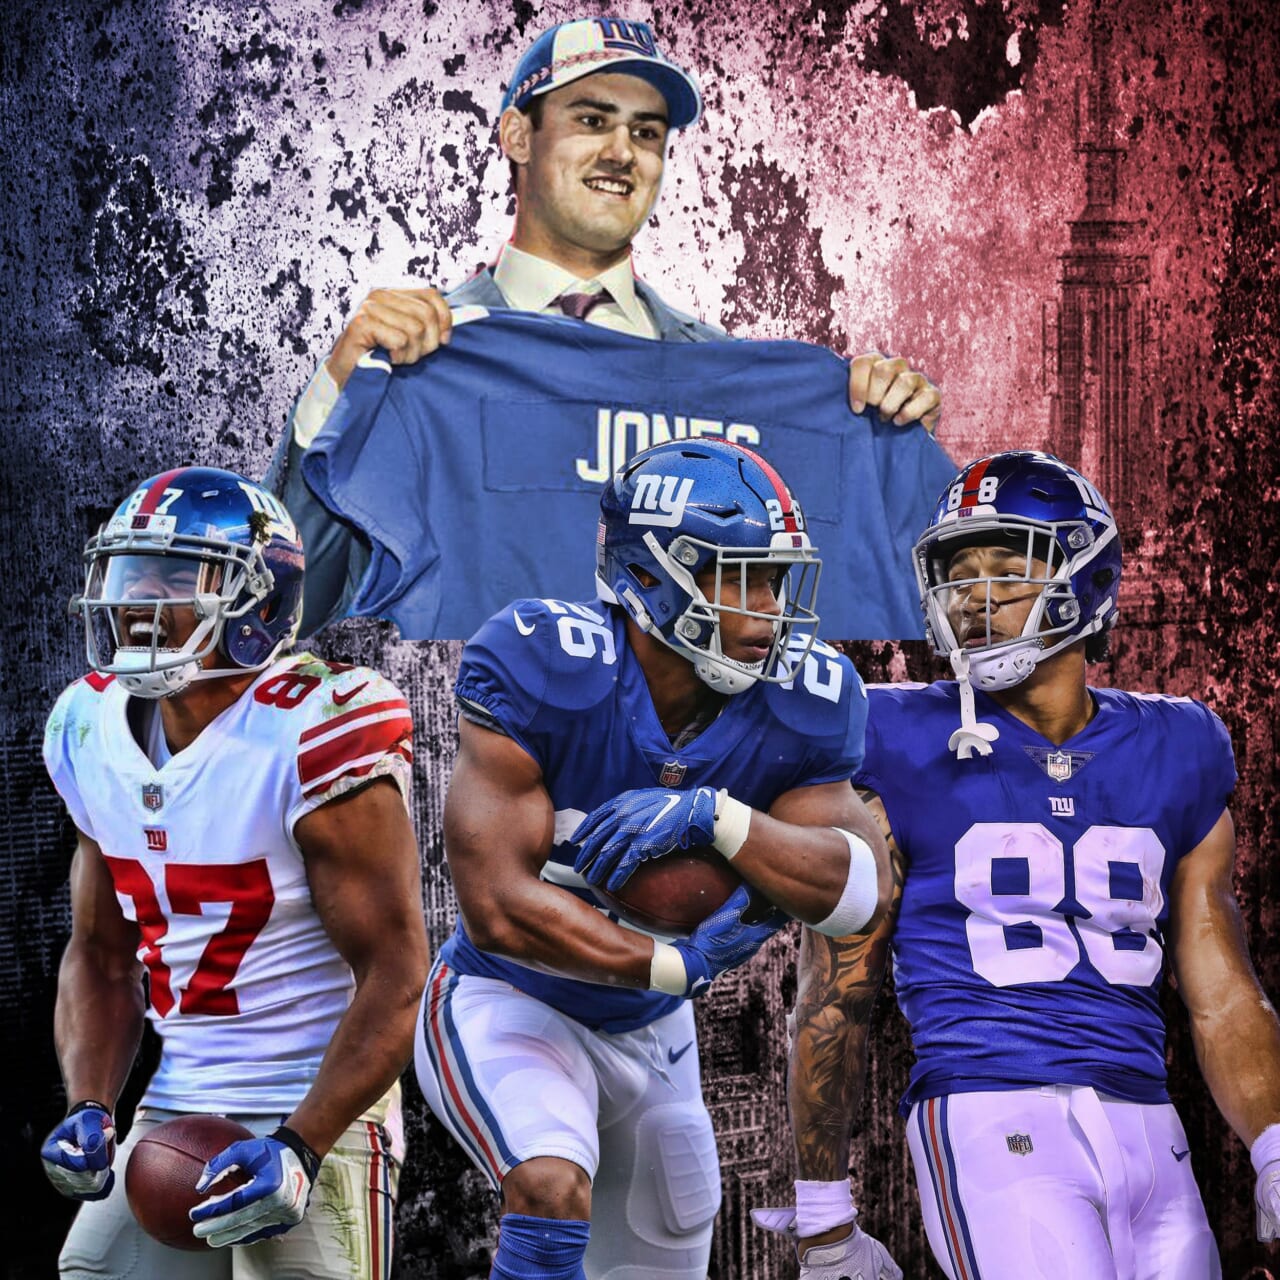 New York Giants: Young, Talented Offense Will Provide A Bright Future